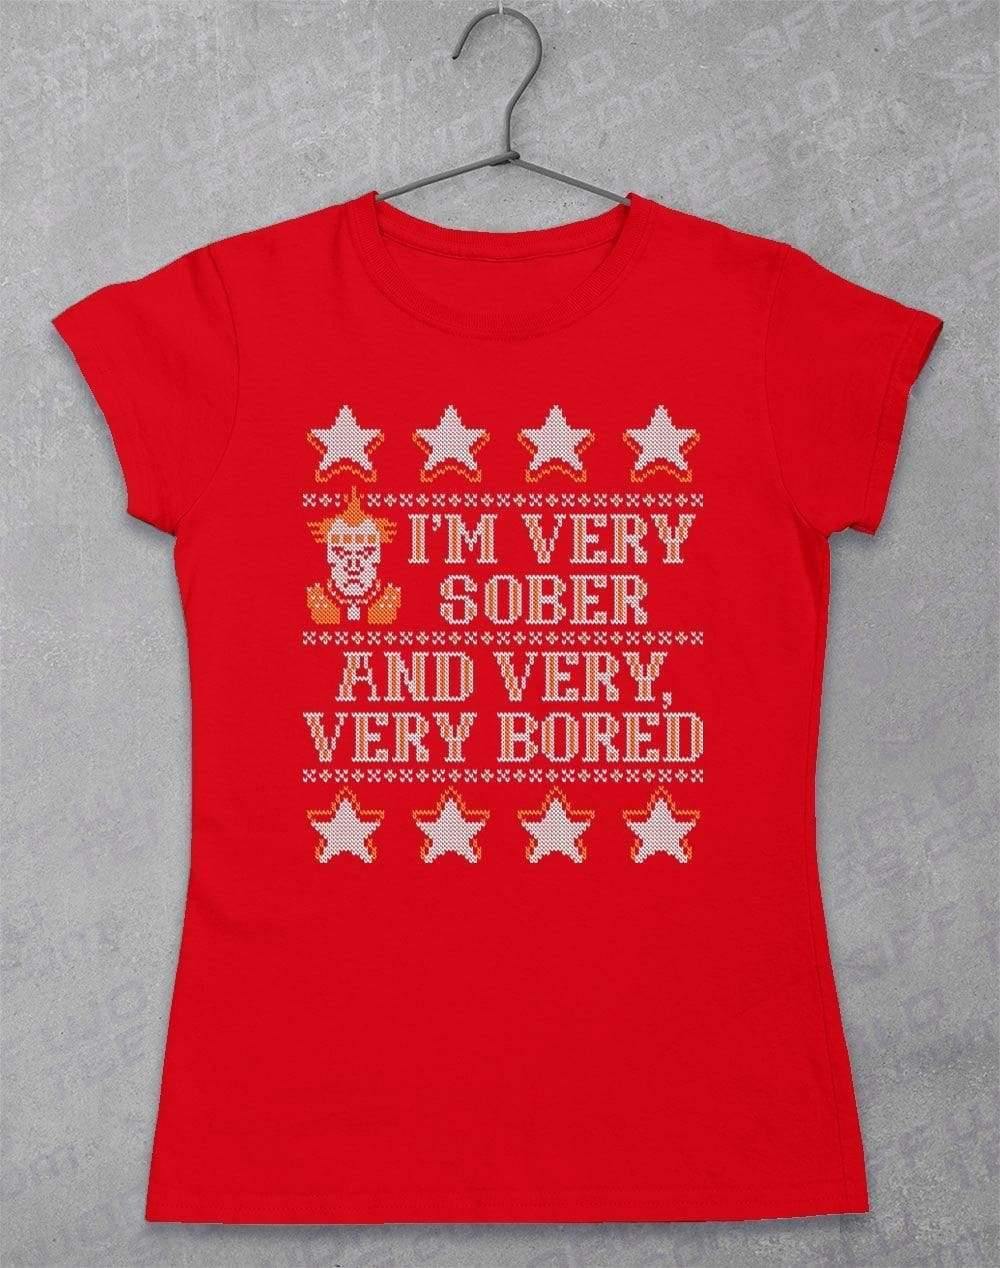 I'm Very Sober and Very Very Bored Festive Knitted-Look Women's T-Shirt 8-10 / Red  - Off World Tees